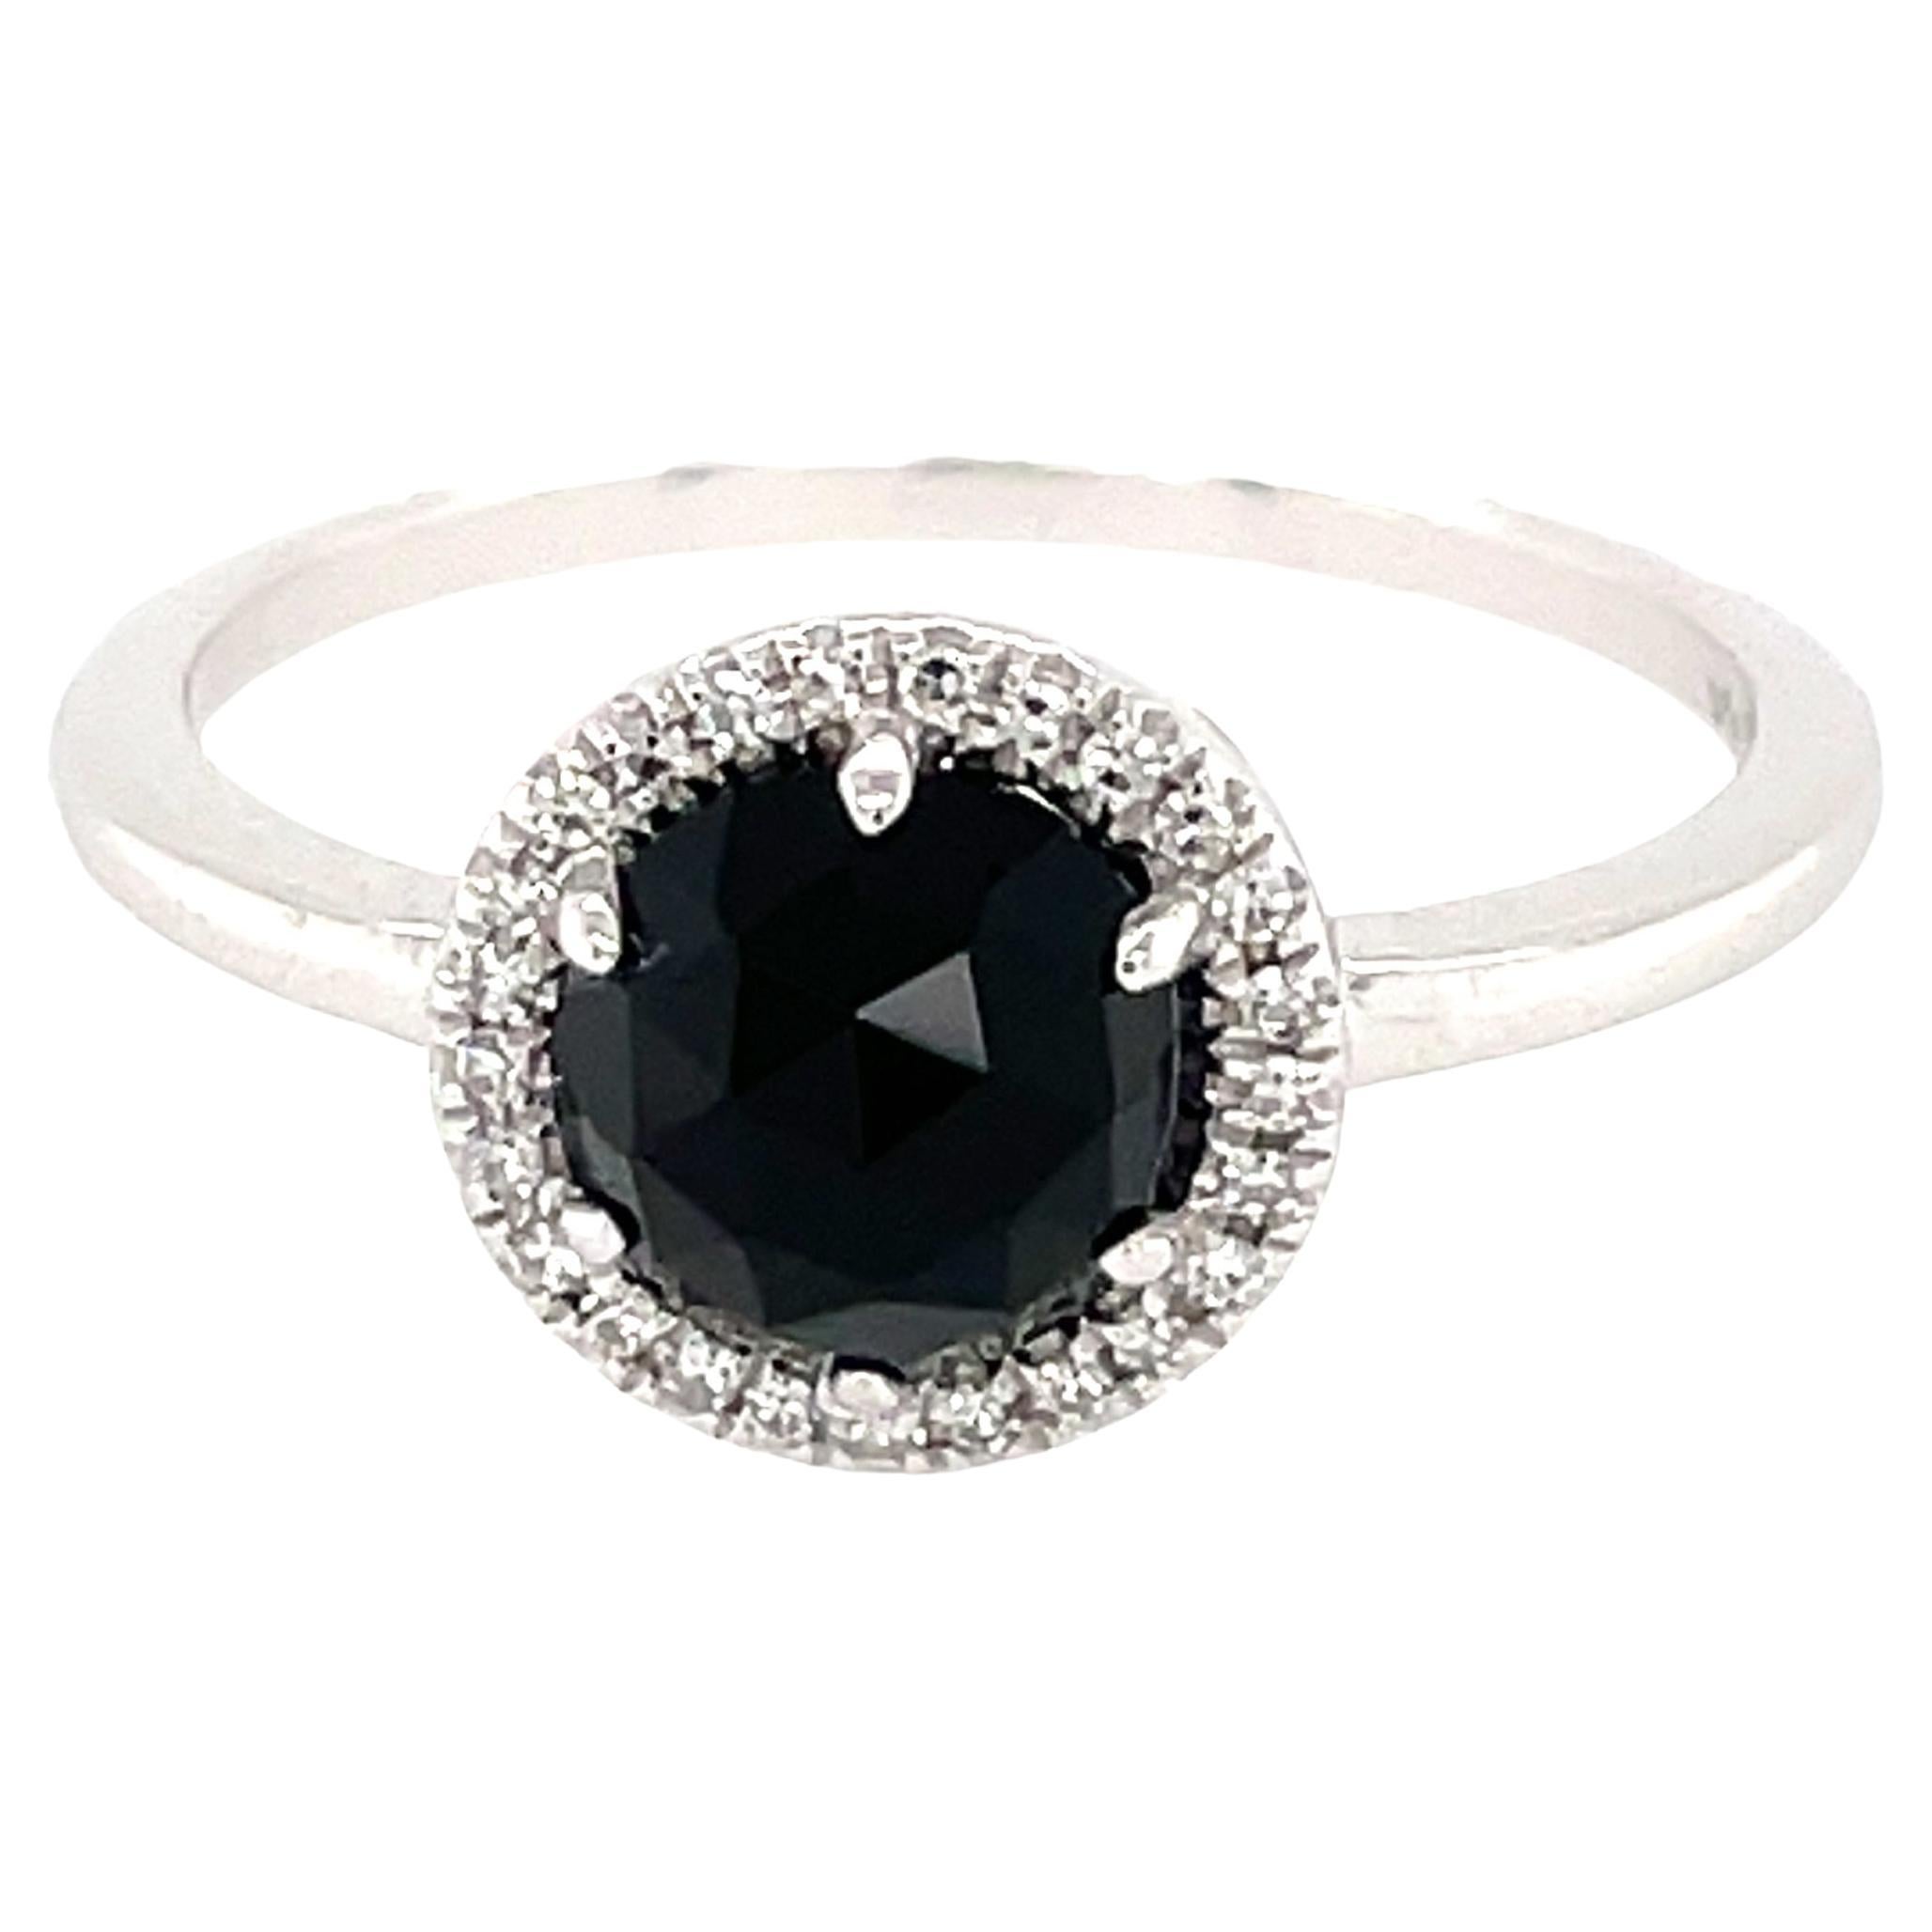 This Black Onyx & Diamond Ring is a stunning and timeless accessory that can add a touch of glamour and sophistication to any outfit. 

This ring features a 1.09 Carat Black Onyx, with a Diamond Halo comprised of 0.06 Carats of Single Cut Round